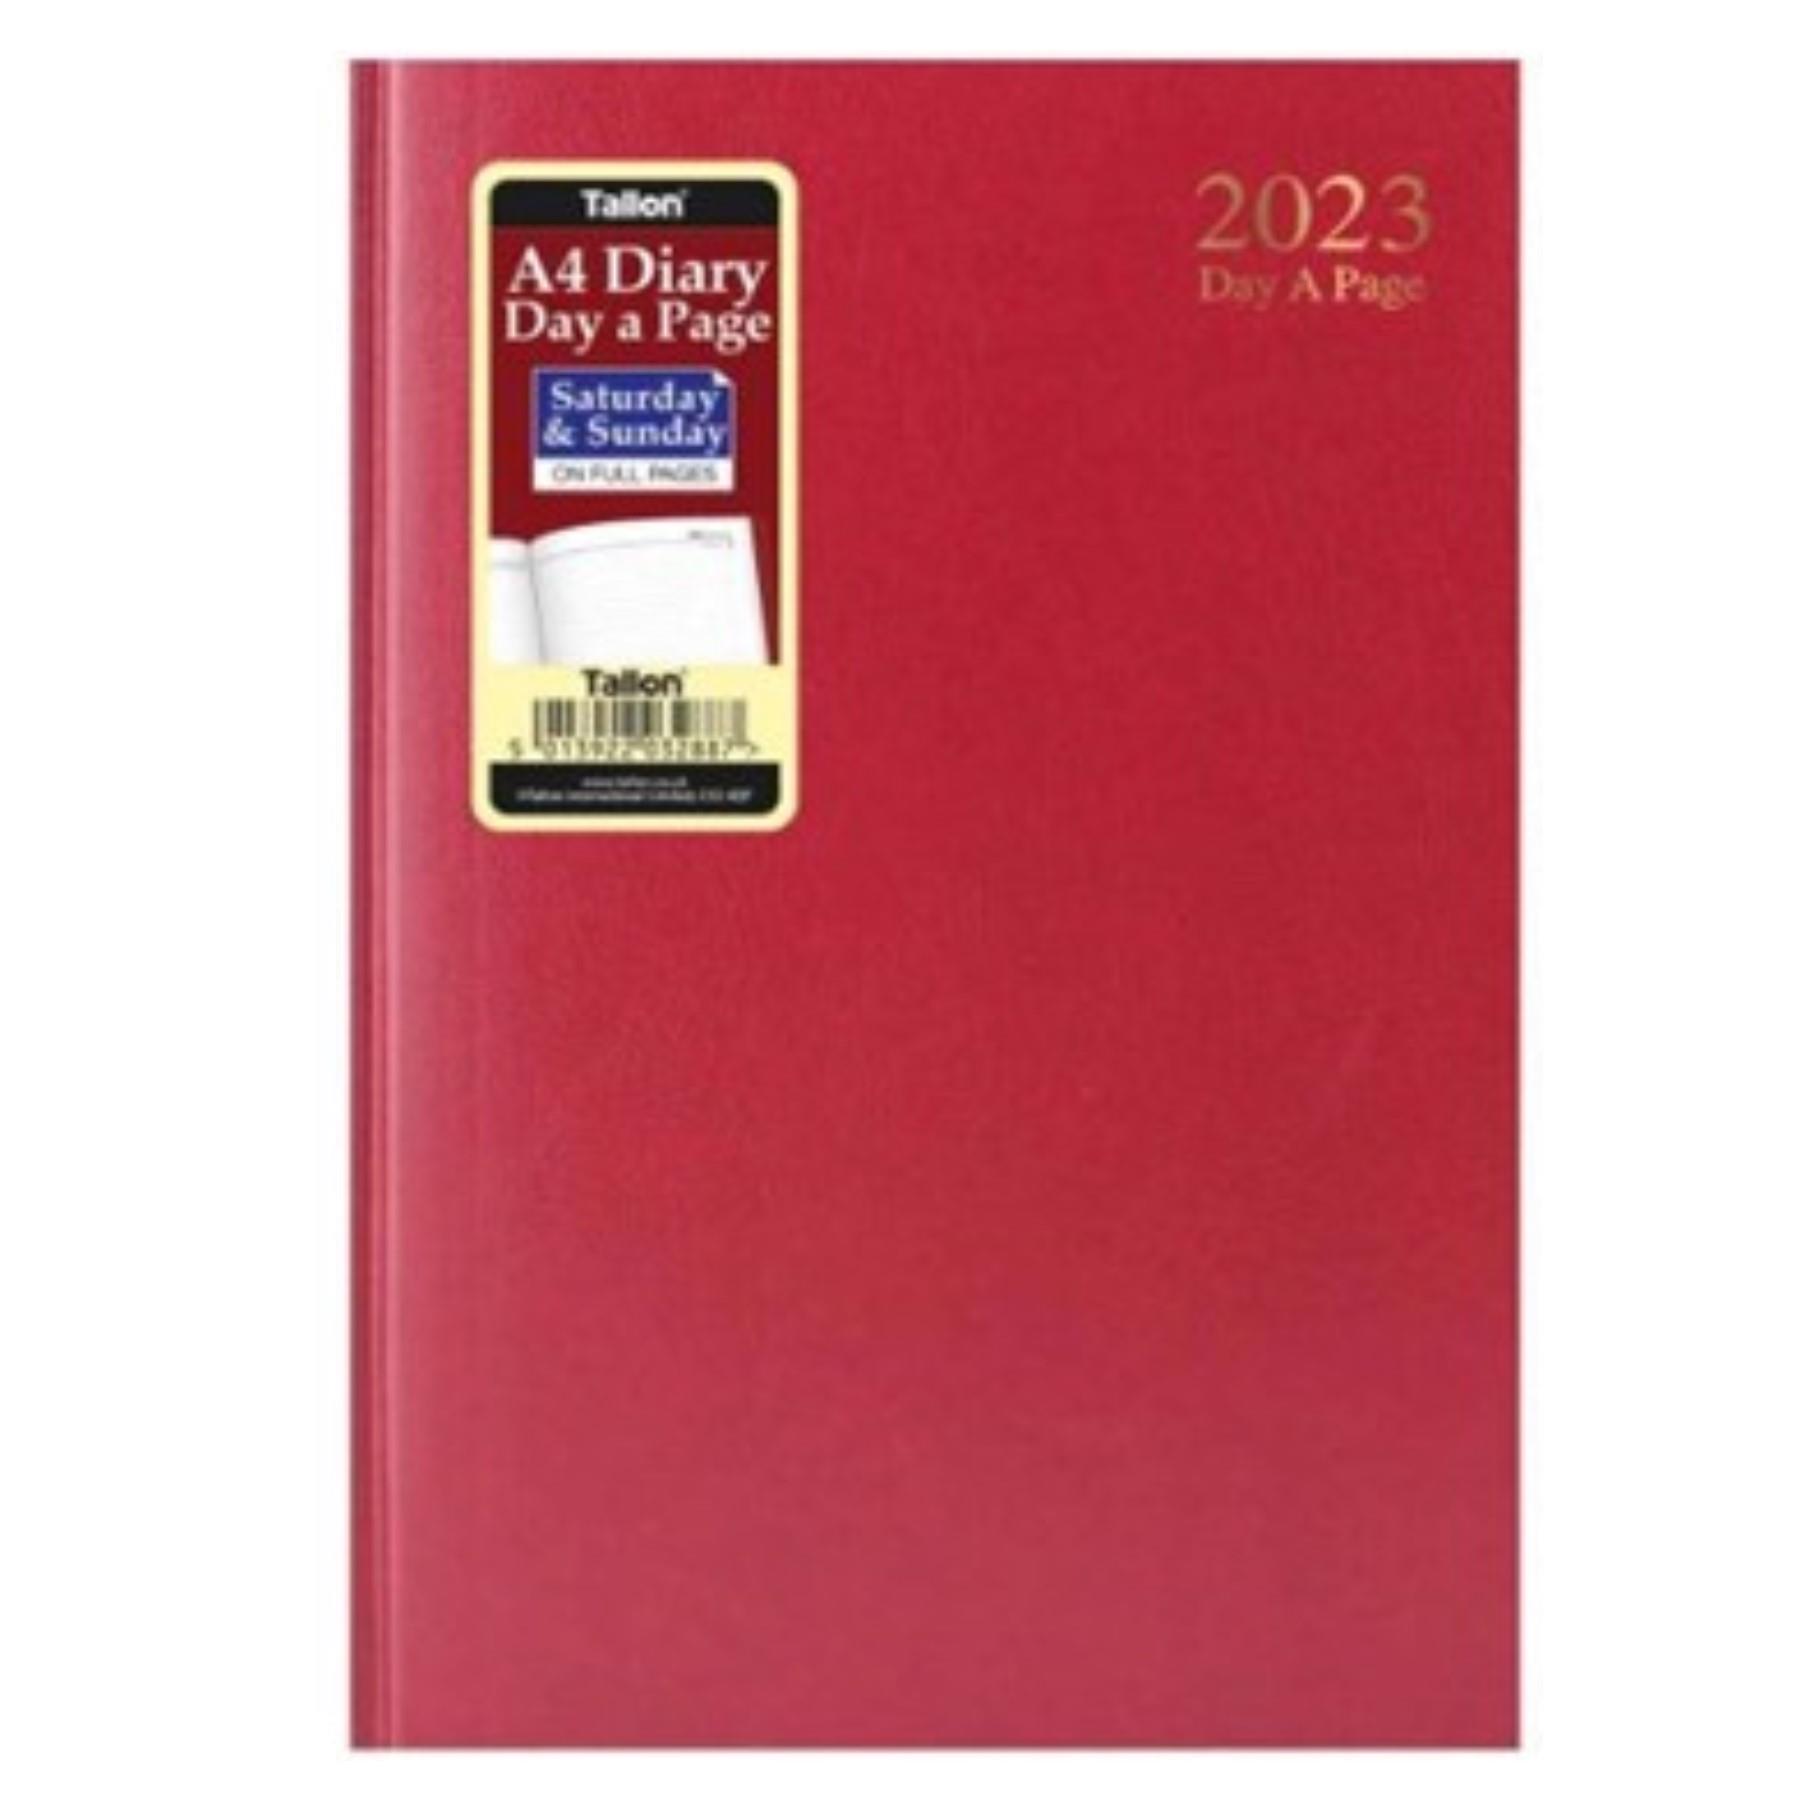 2023 A4 Hardback Day a Page FULL Sat/Sun Diary 3288 - Red